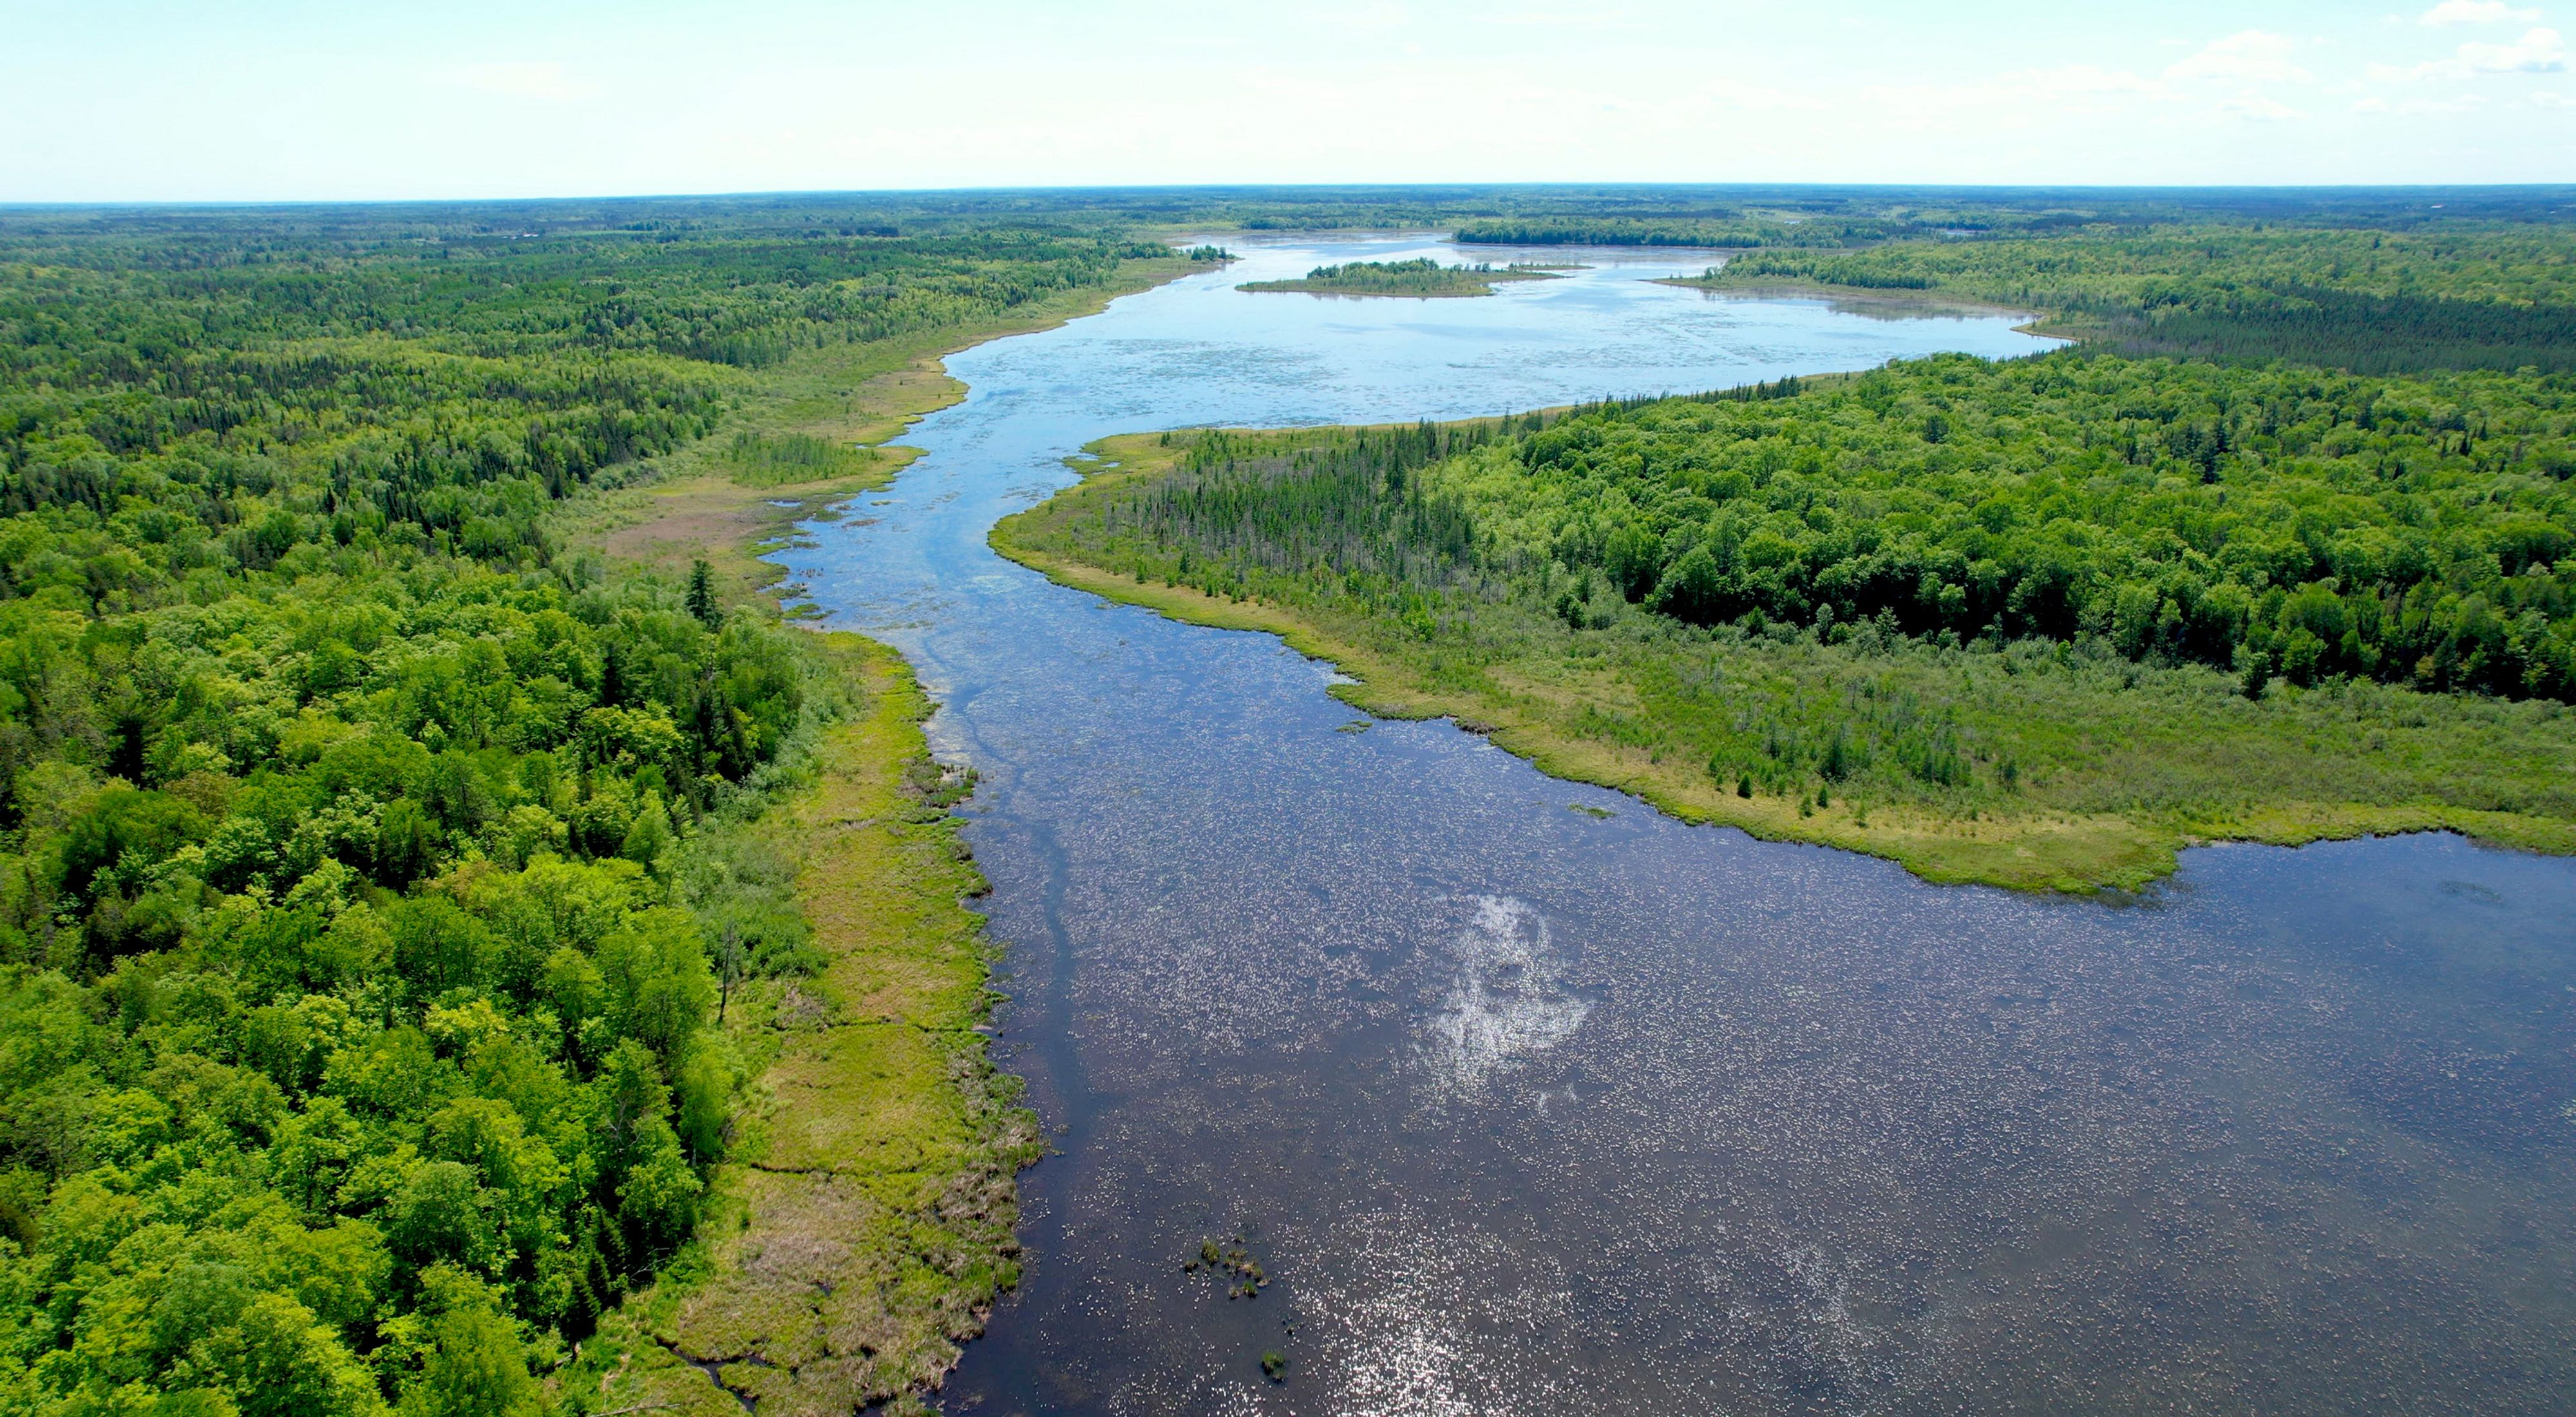 Aerial view of a healthy lake surrounded by forest.